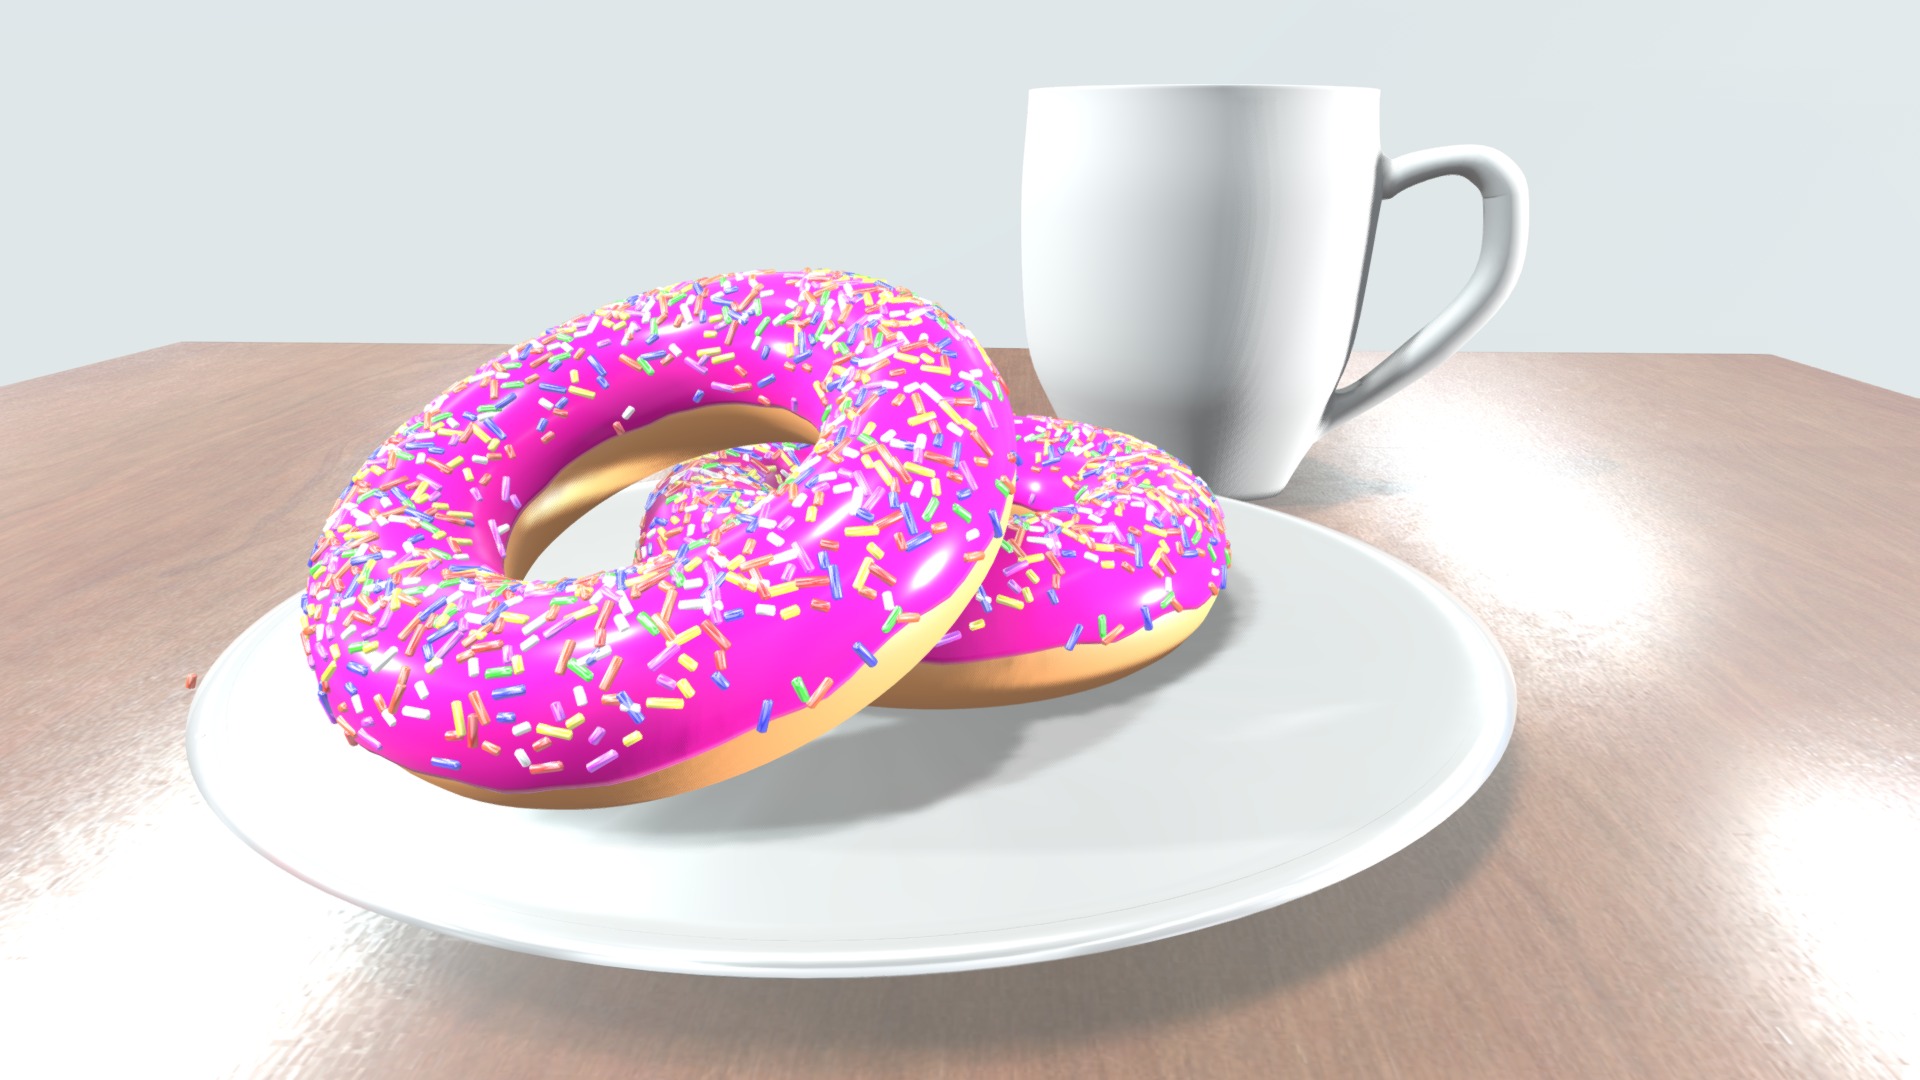 3D model 2 Donuts And Mug - This is a 3D model of the 2 Donuts And Mug. The 3D model is about a donut with sprinkles on it.